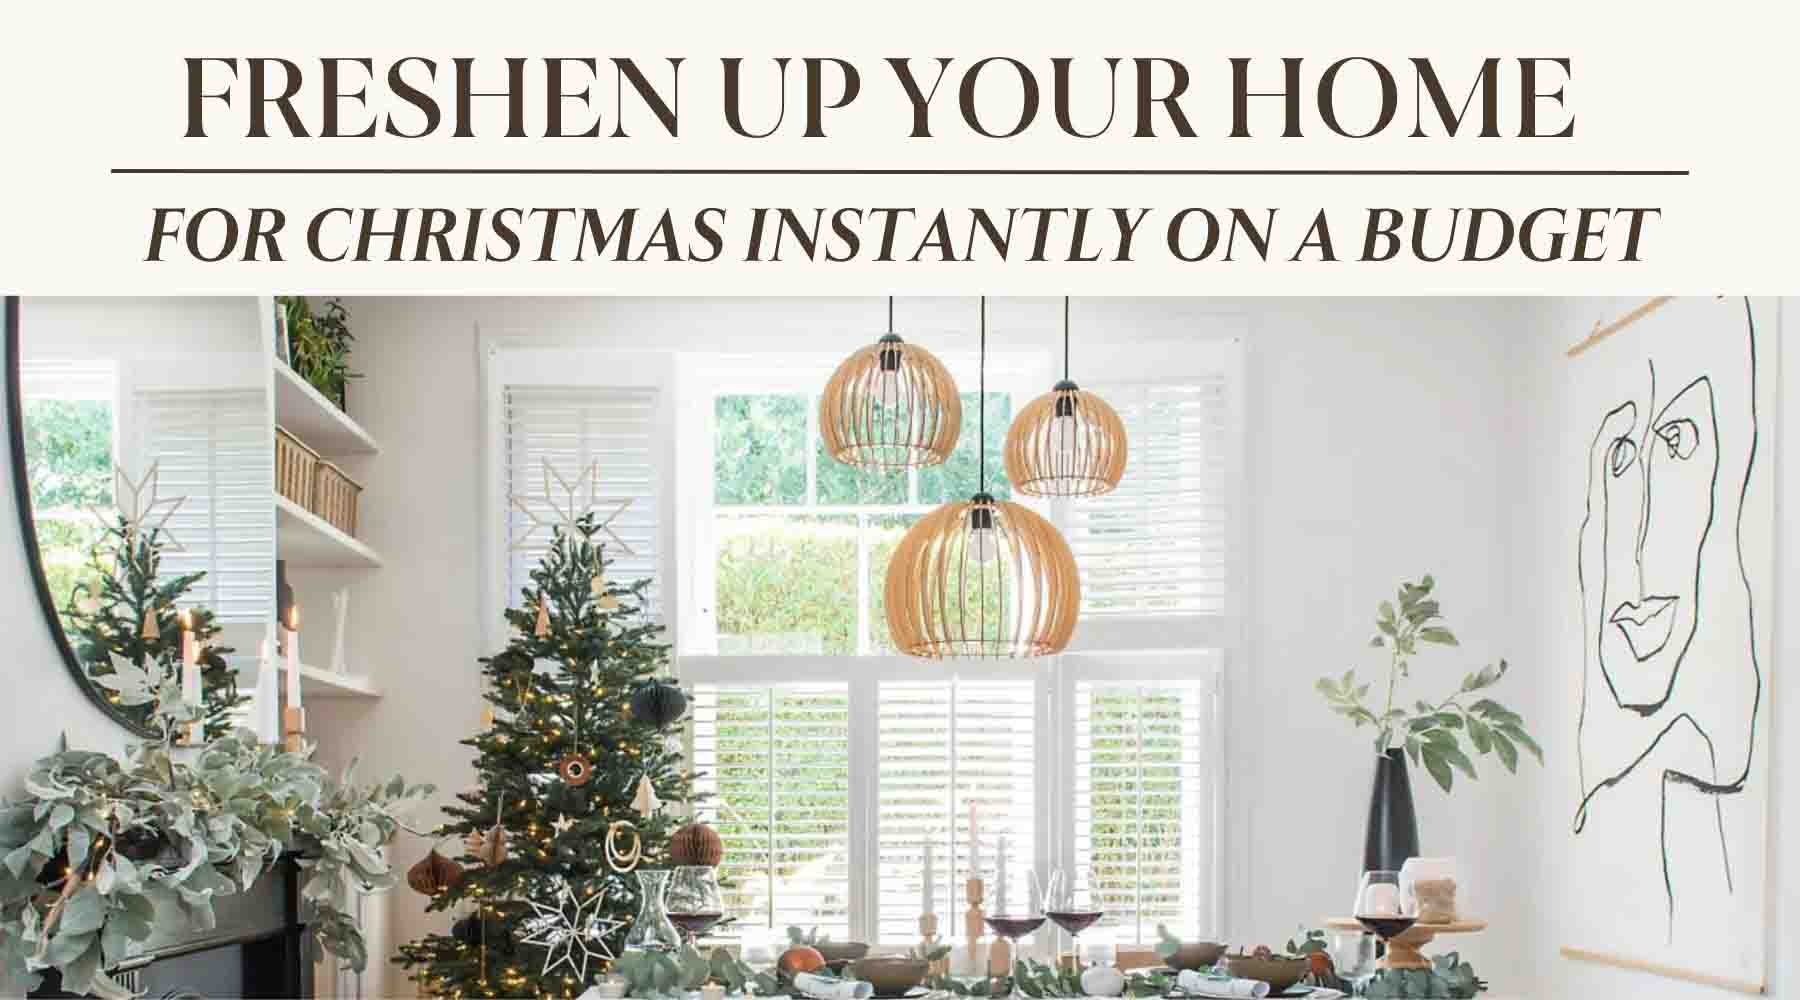 freshen up your home for christmas on a budget